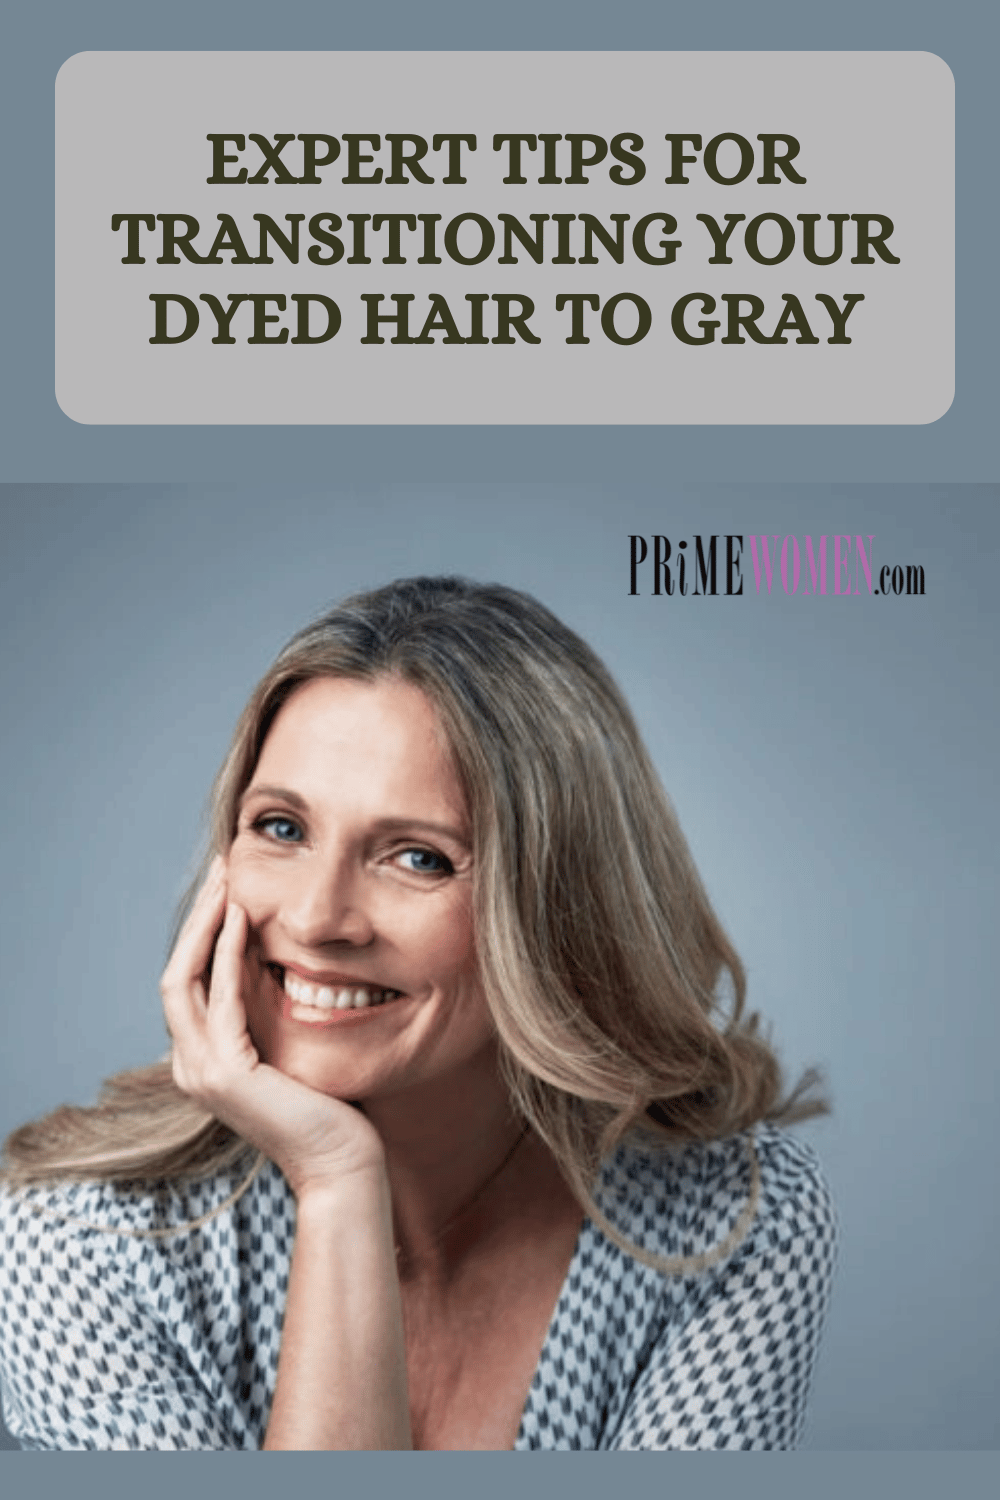 Expert tips for transitioning your dyed hair to gray